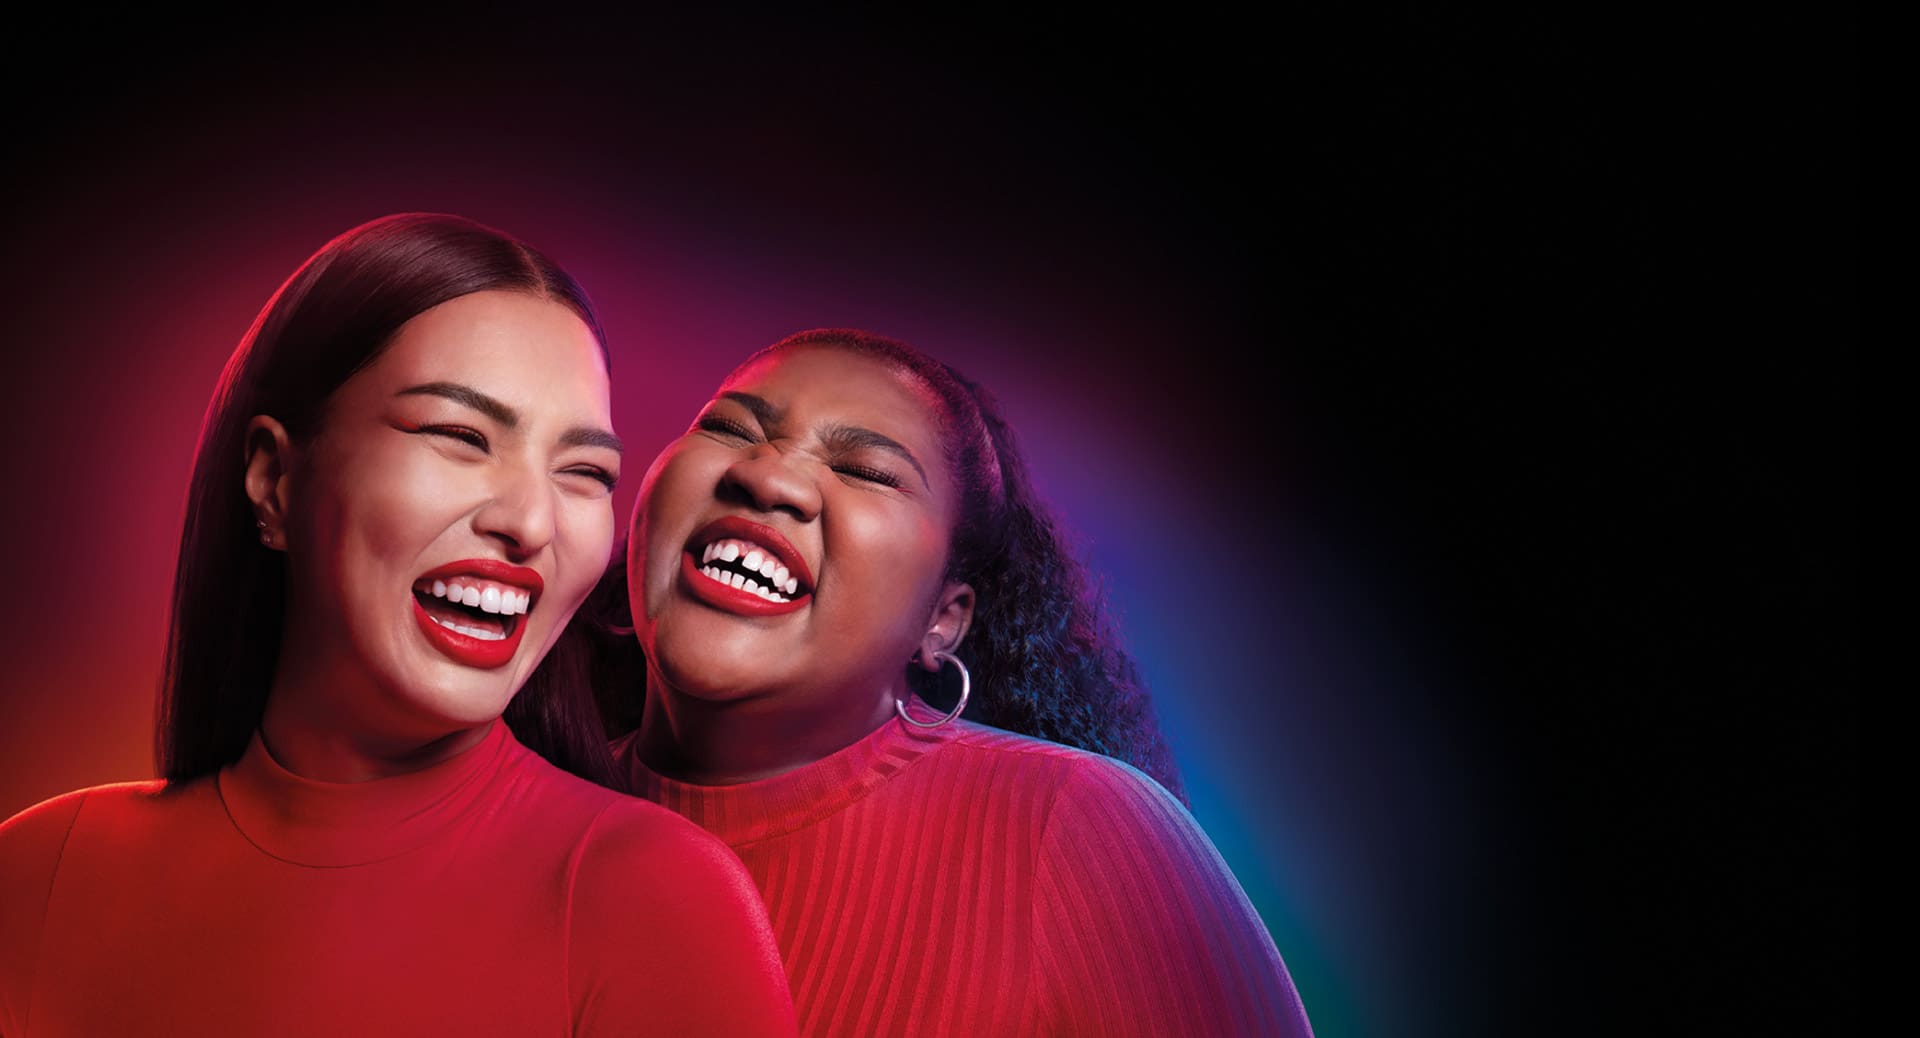 Ann and Suzie smiling out loud; image used for introducing Colgate's best teeth whitening product